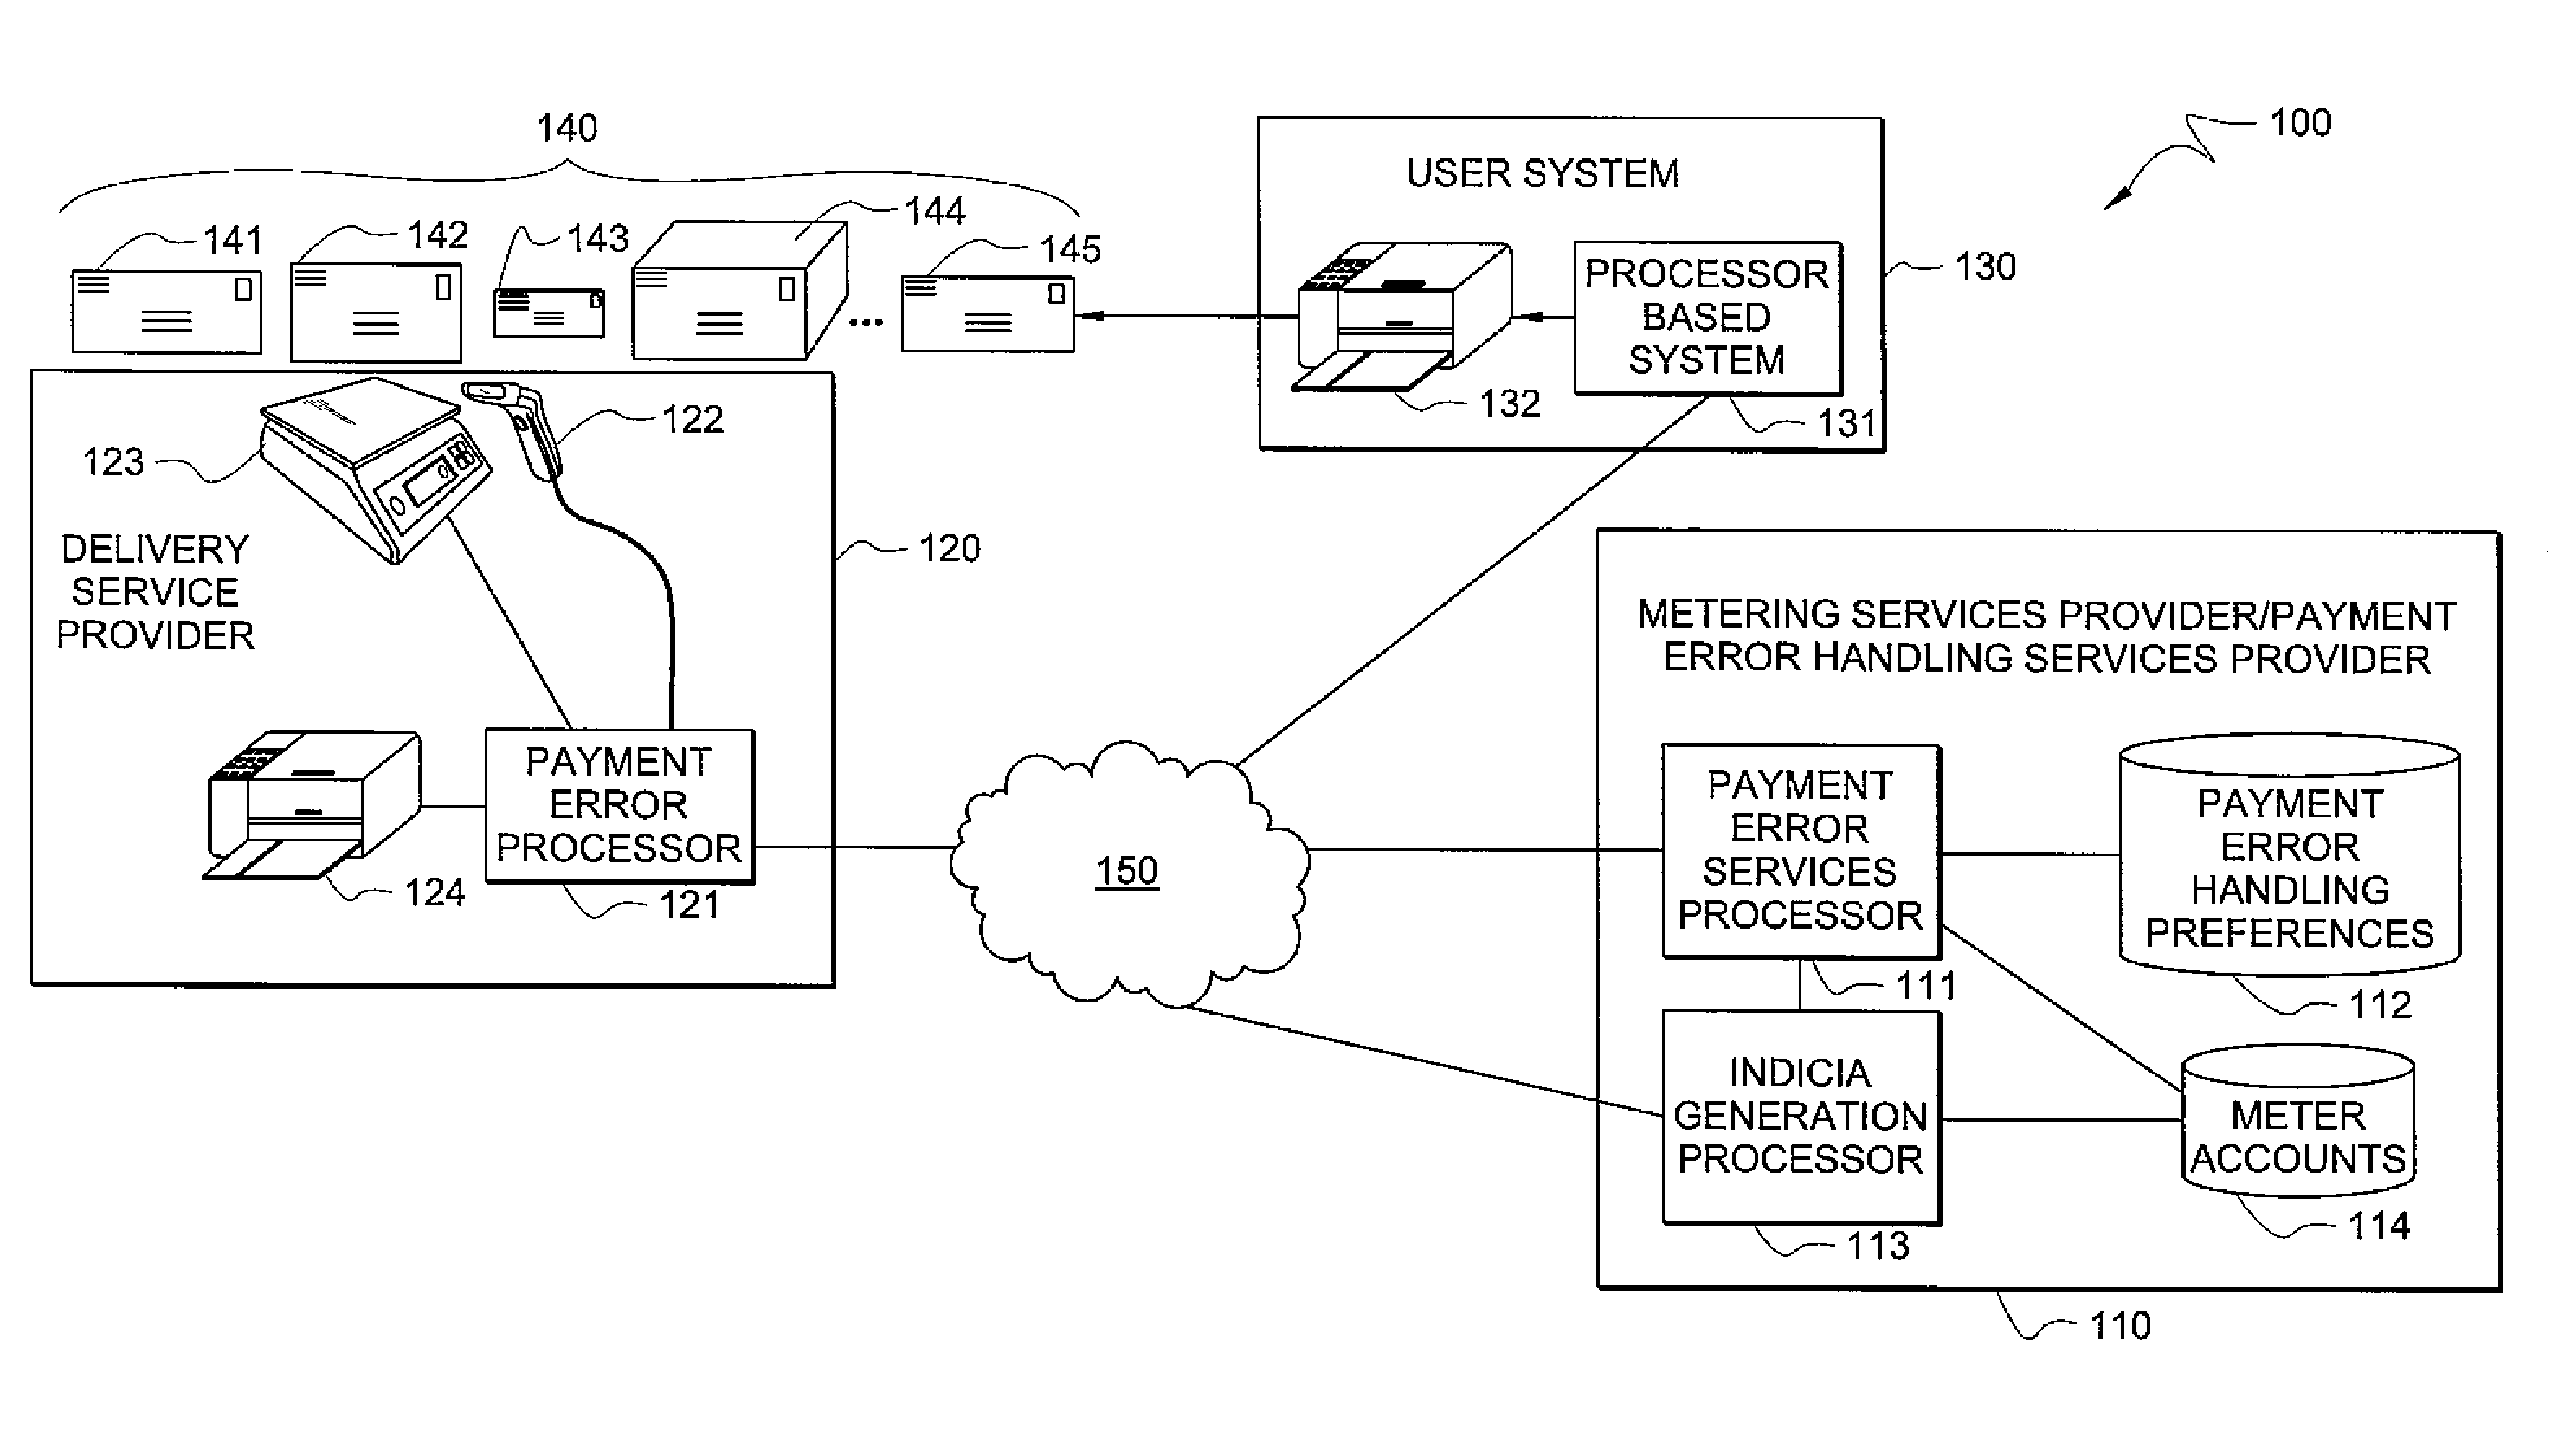 System and method for handling payment errors with respect to delivery services